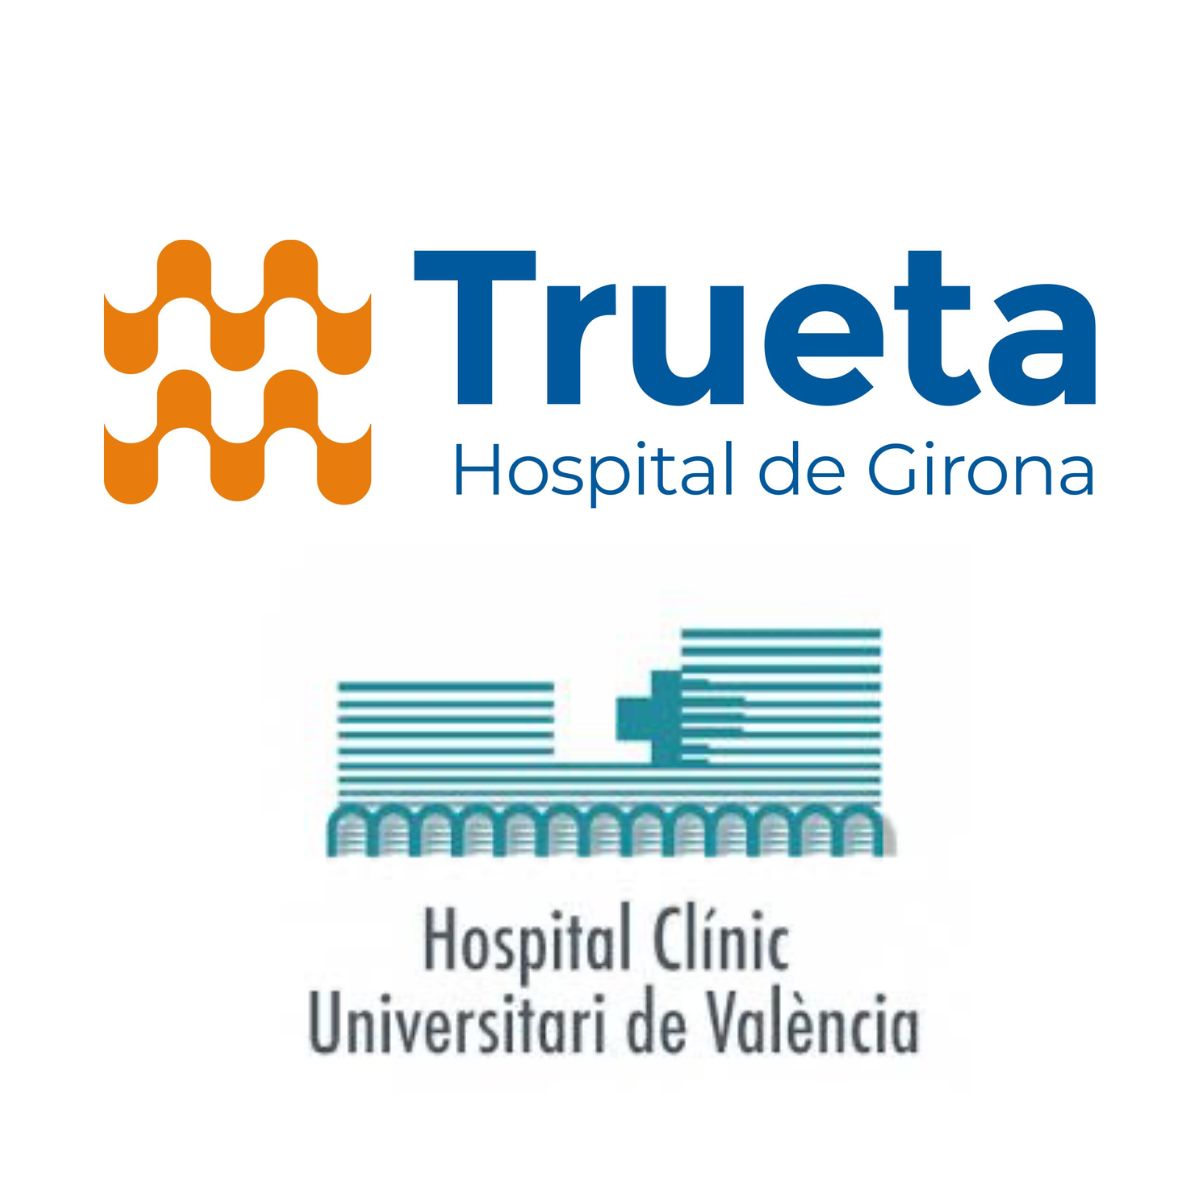 We are pleased to announce the addition of 2 new hospitals to our study, Hospital Josep Trueta ( @htrueta ) in Girona and Hospital Clínico Universitario in Valencia have joined us in this important effort.!

#LiverCancer #liveration